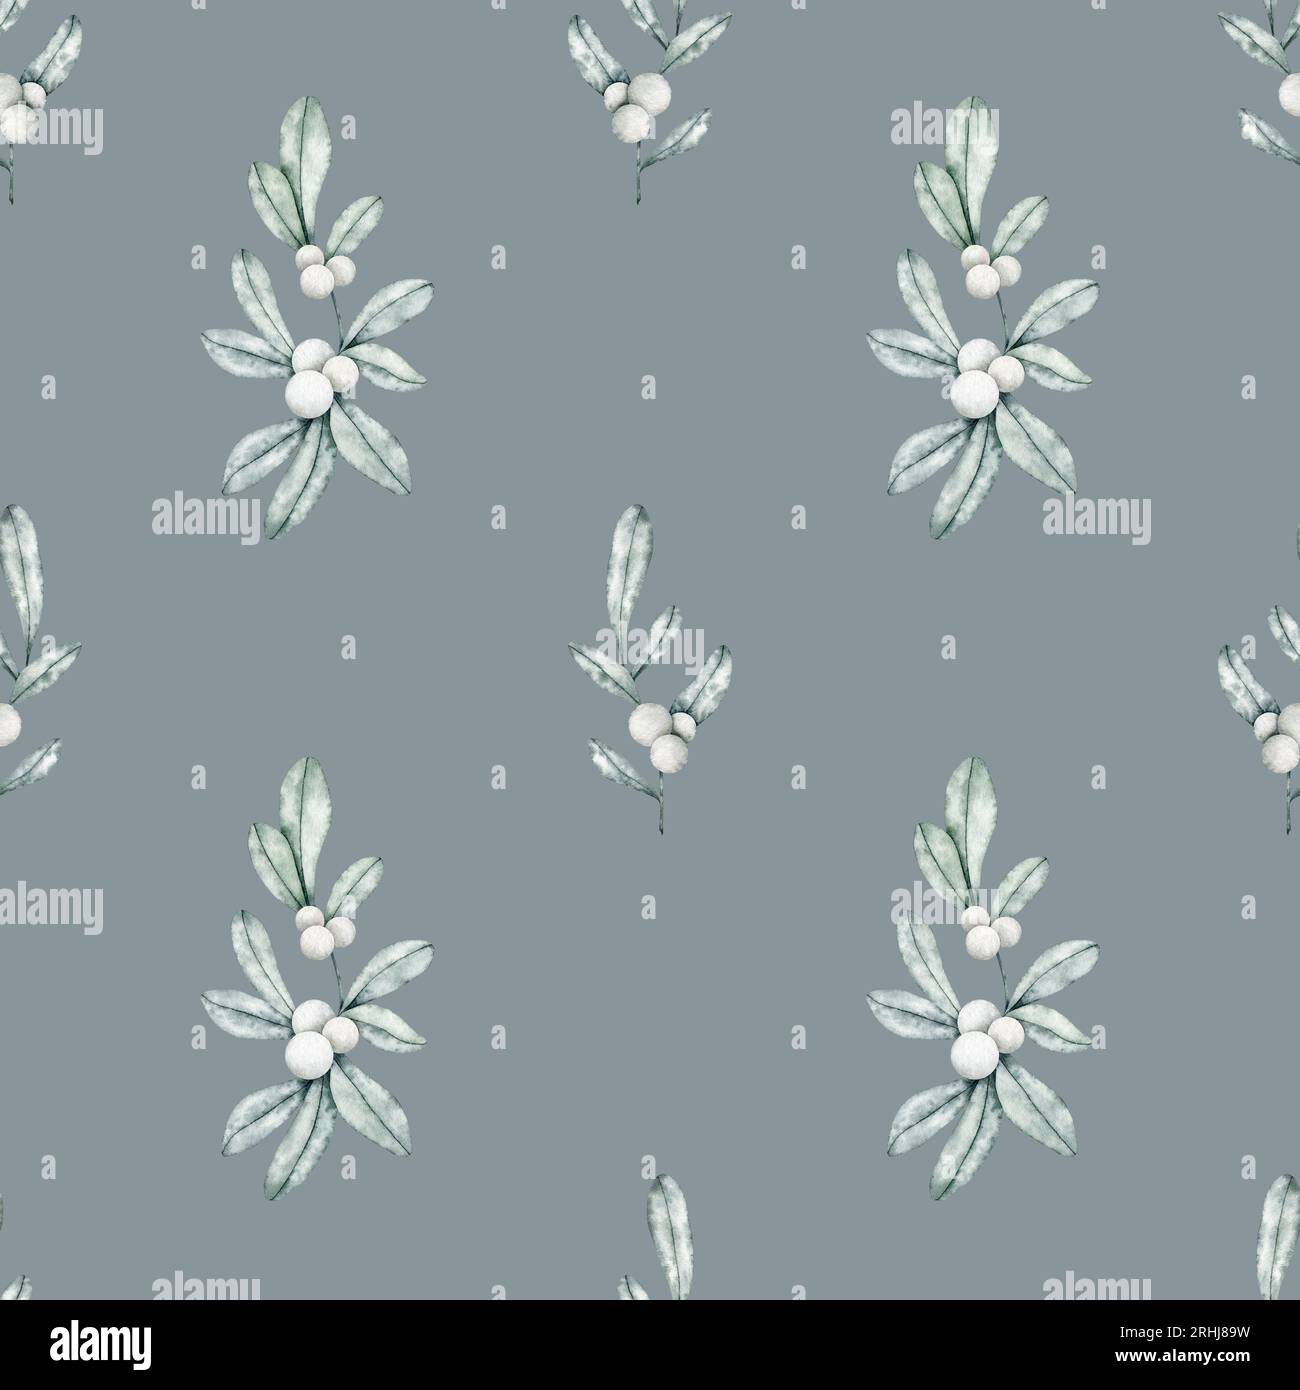 Seamless pattern with Symphoricarpos, snowberry, waxberry, or ghostberry. Deciduous shrub with white berries on grey background. Endless Hand drawn Stock Photo